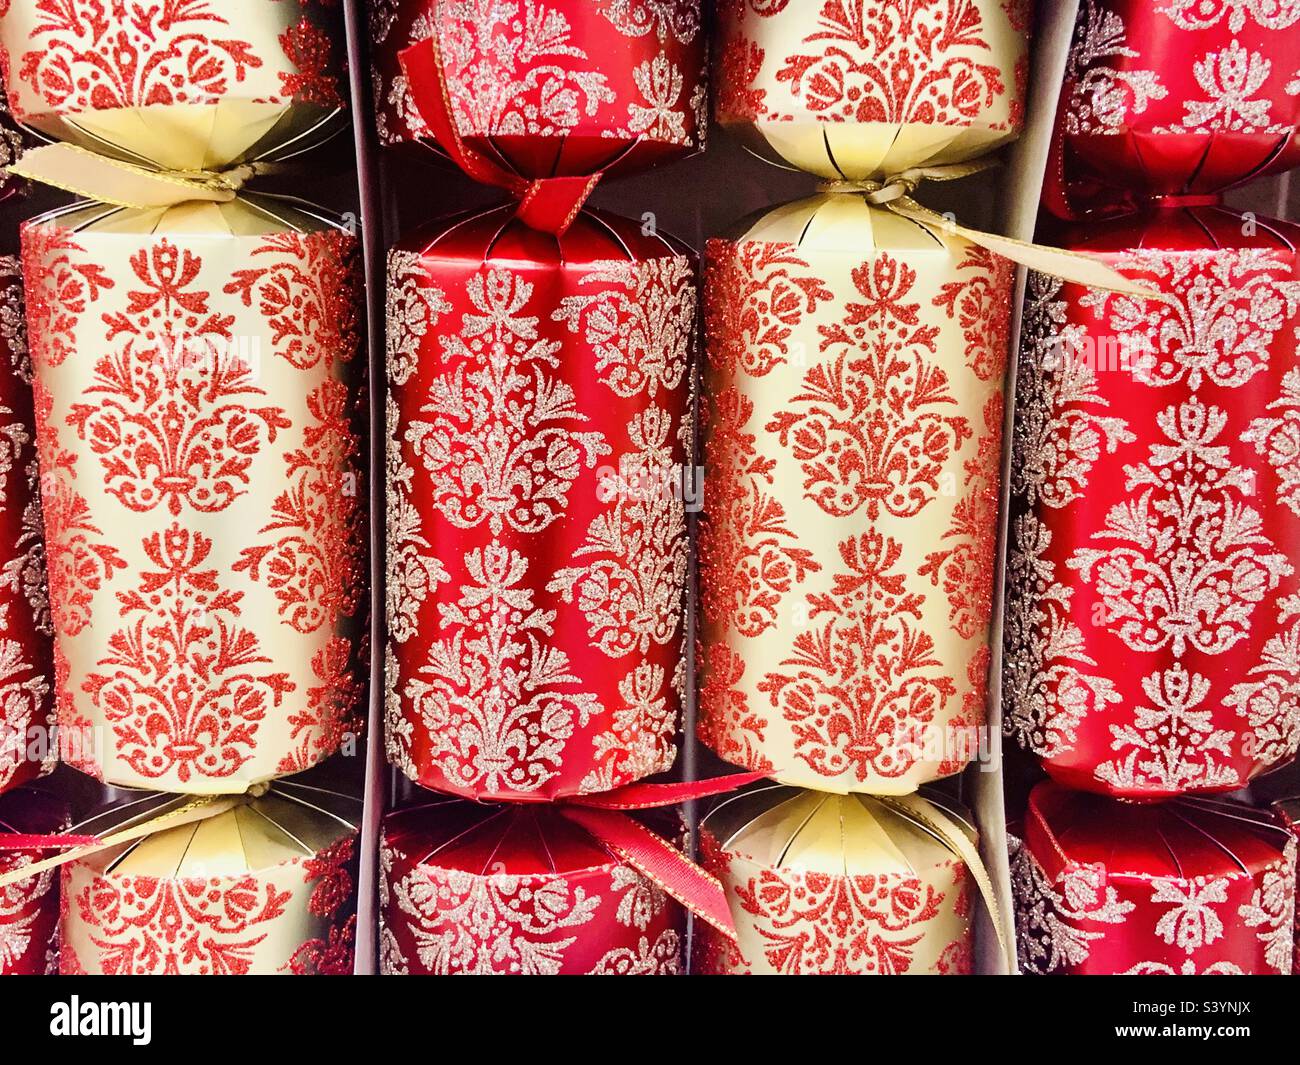 Red and gold patterned Christmas crackers in a box Stock Photo